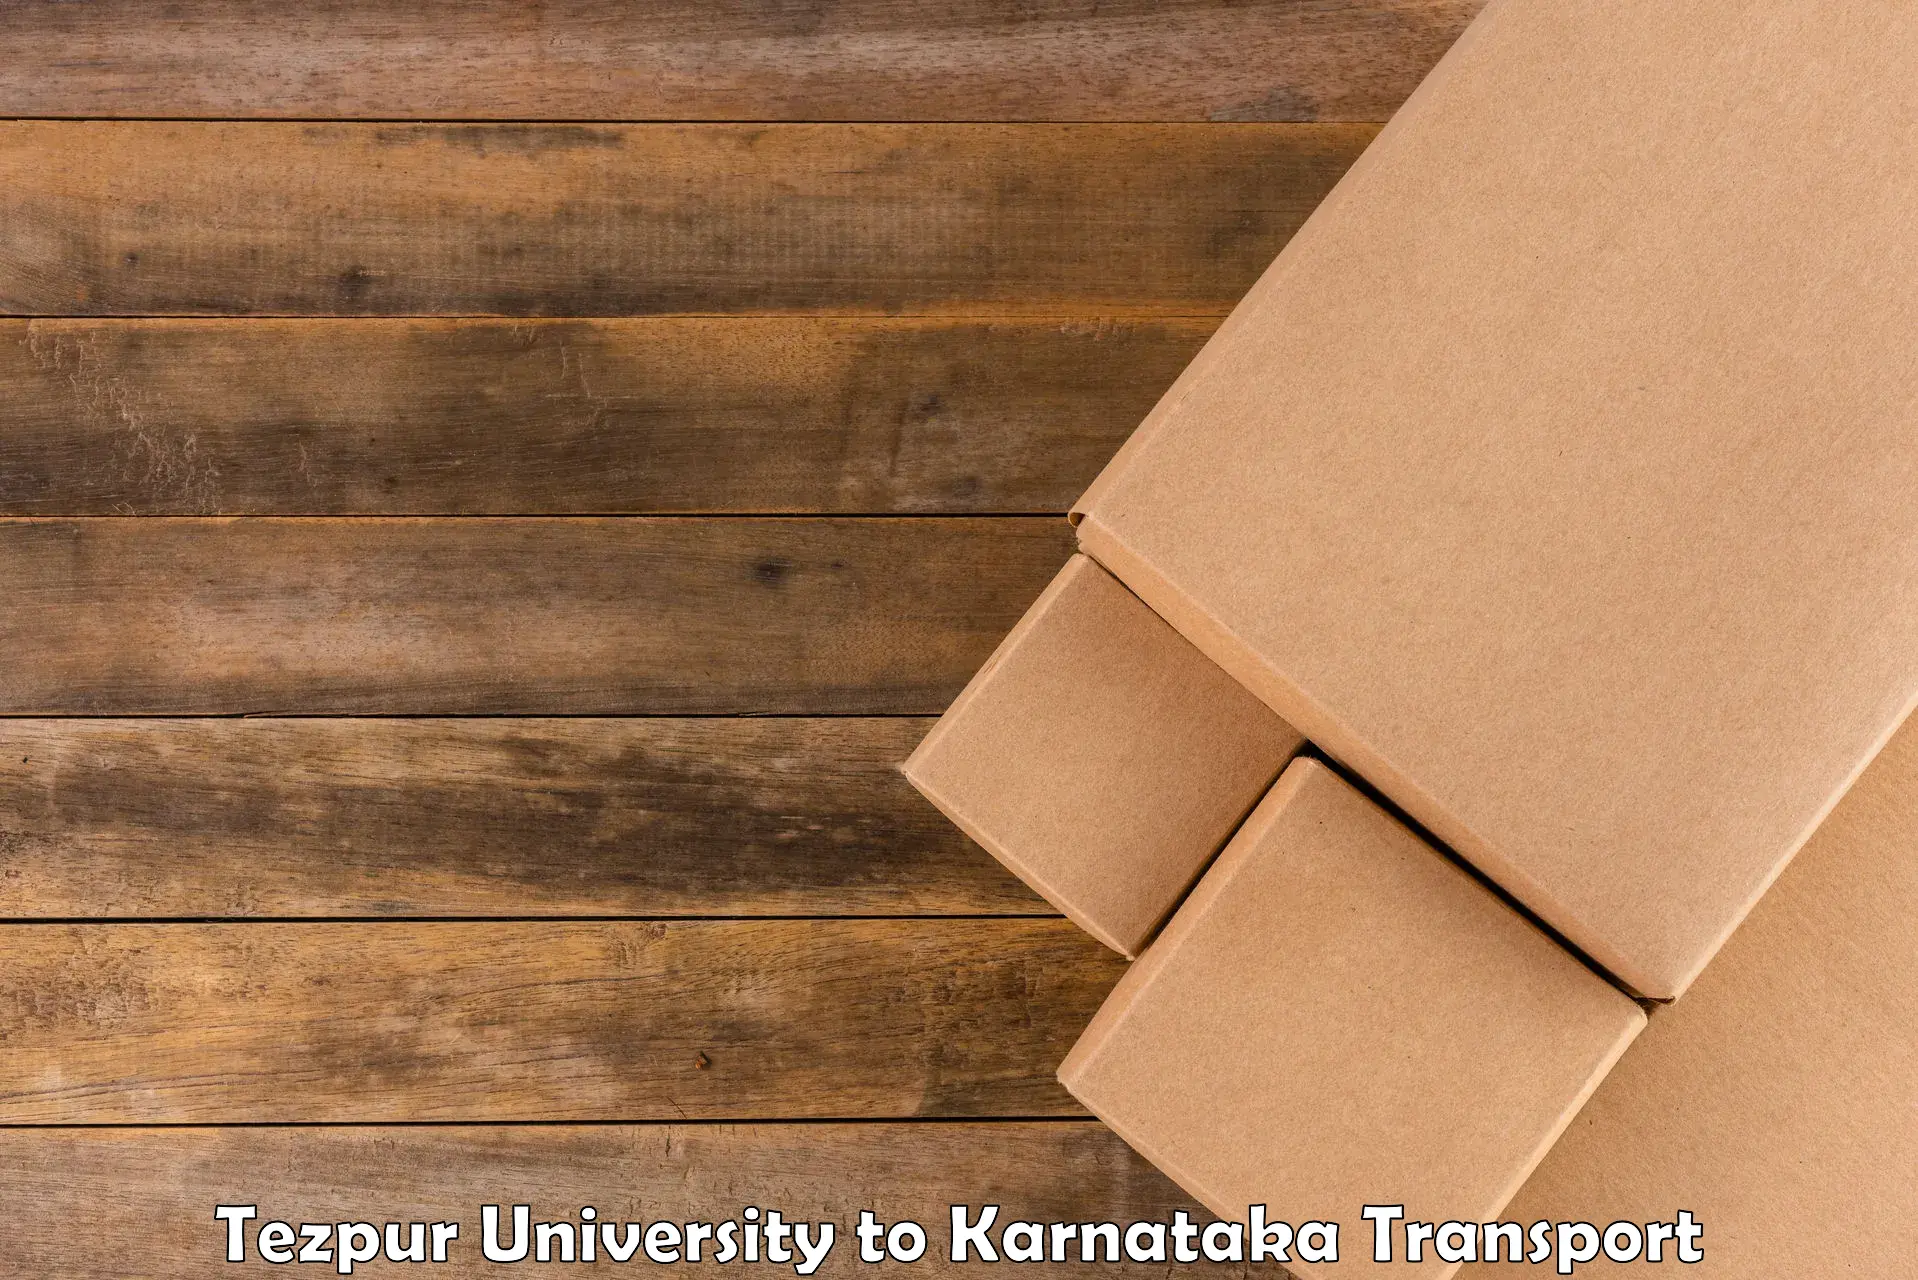 Air freight transport services Tezpur University to Siruguppa